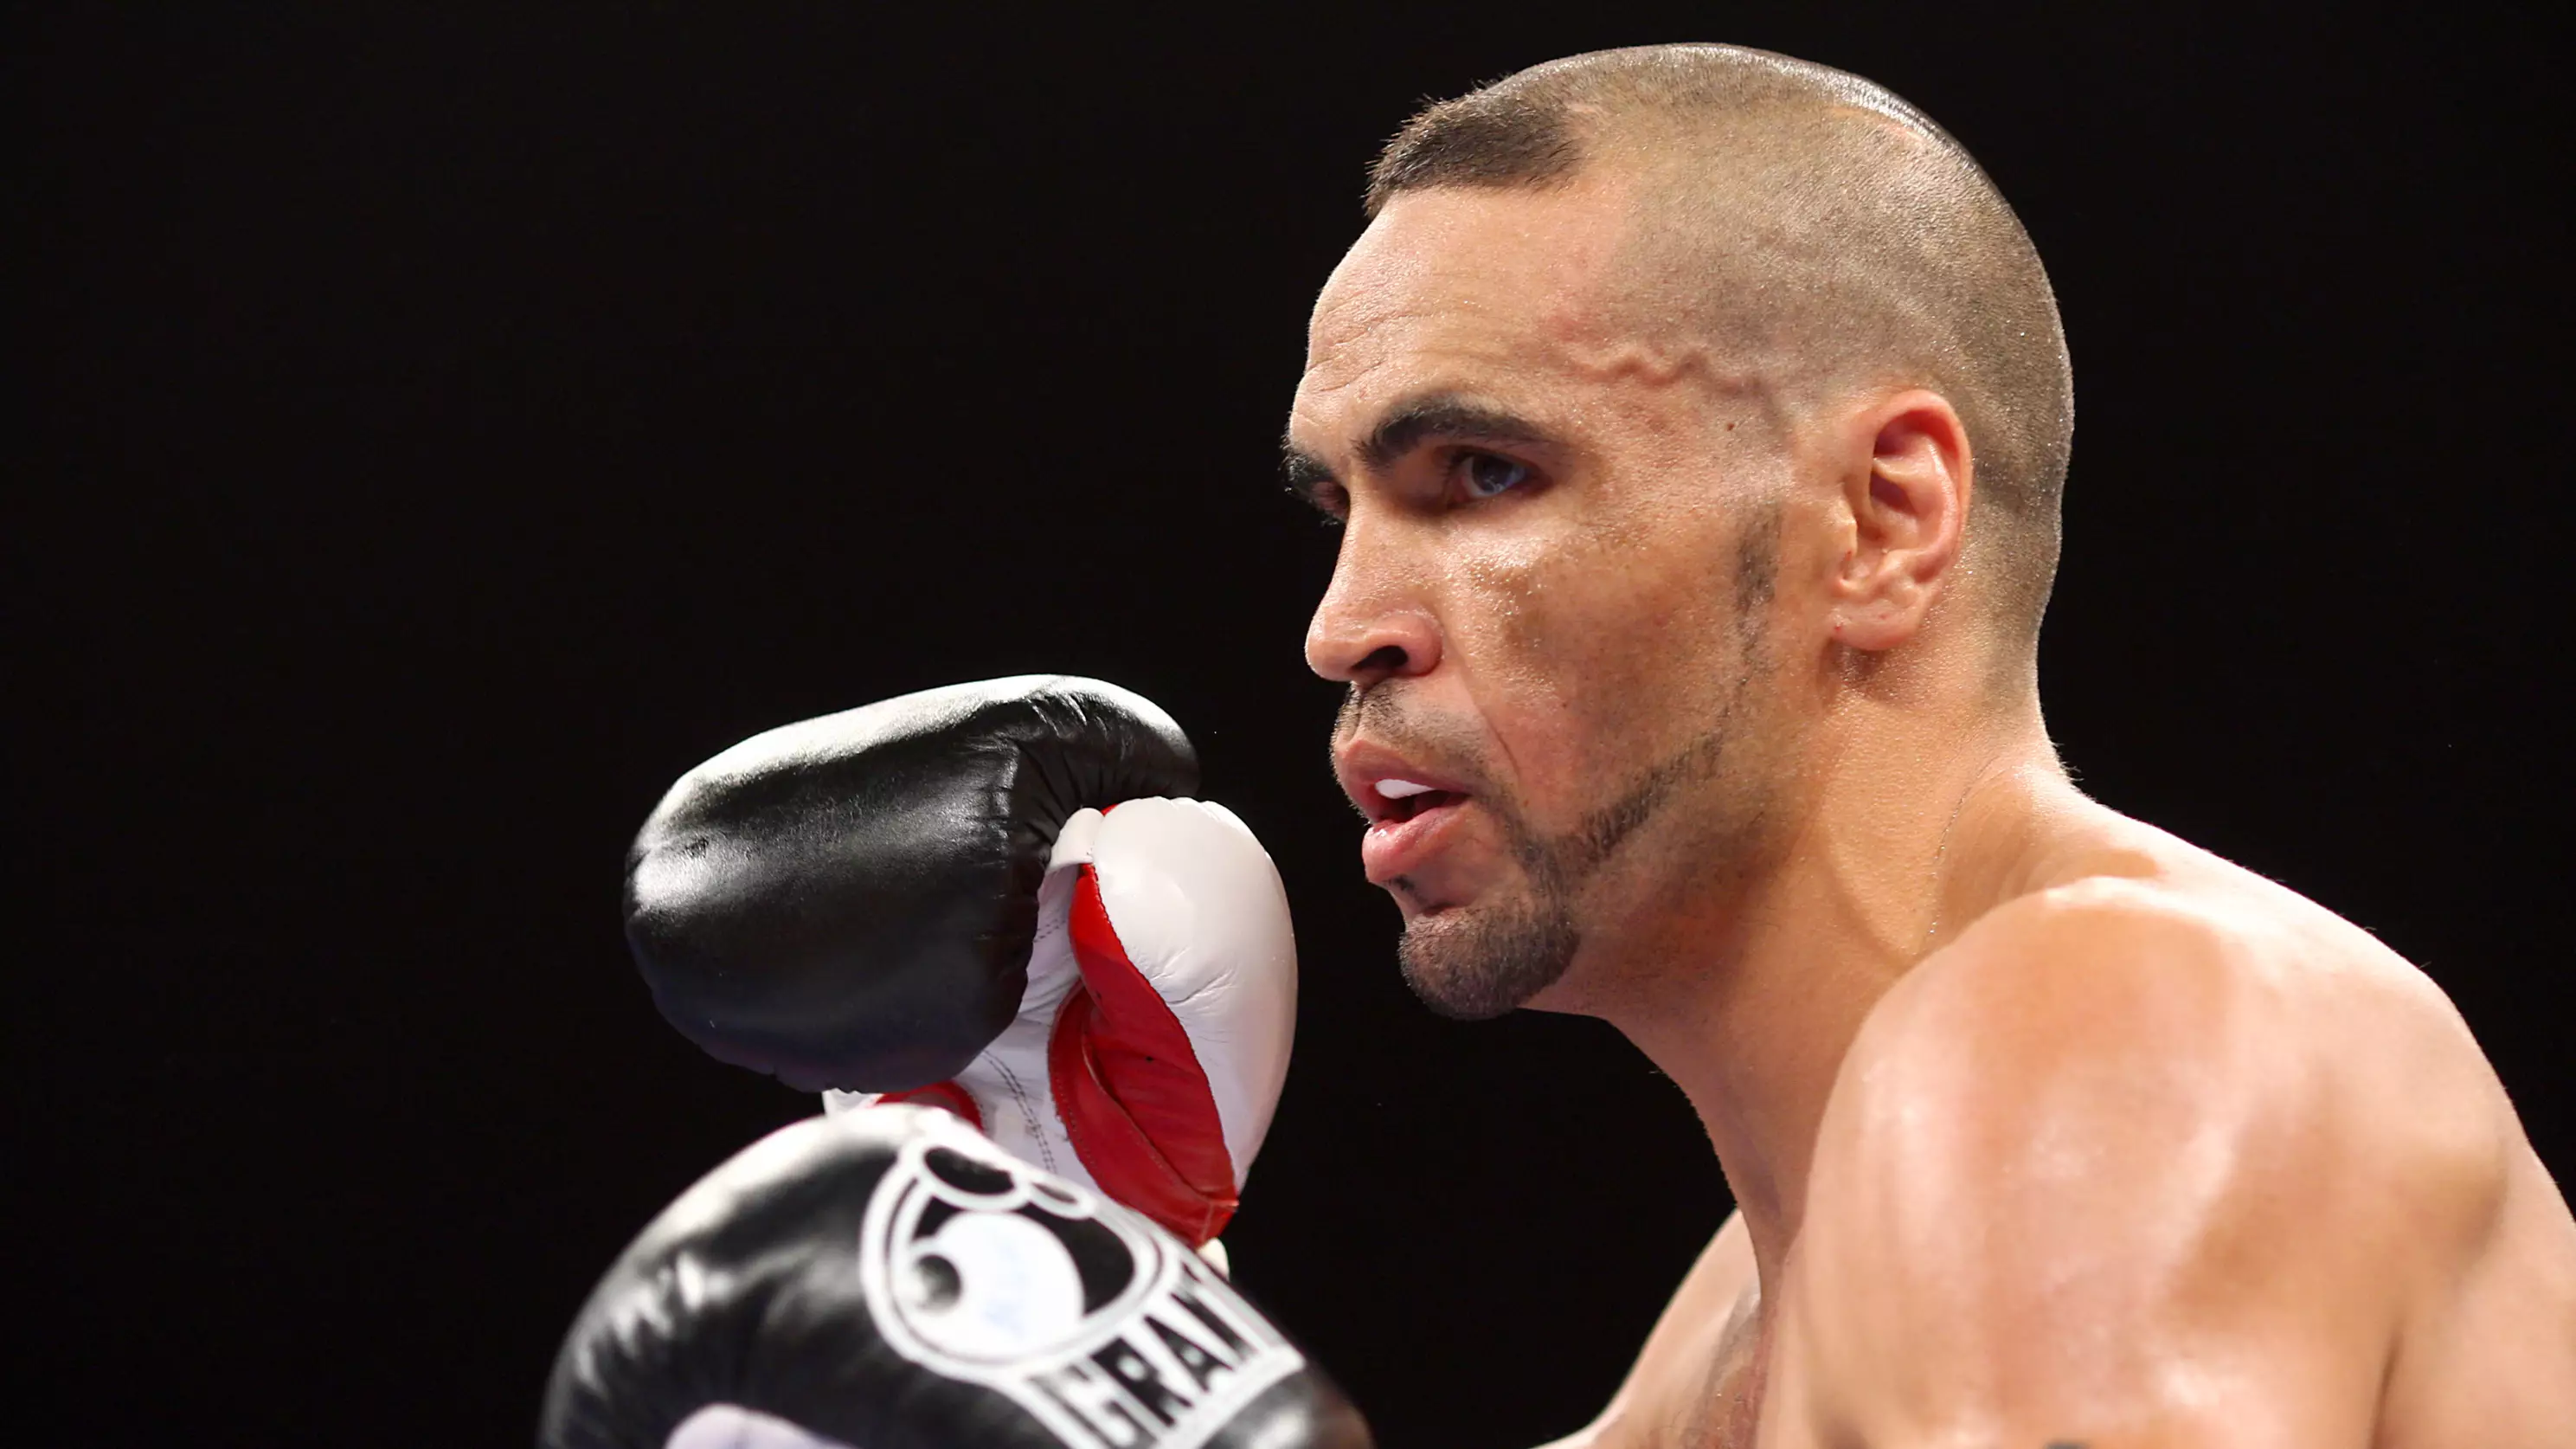 Anthony Mundine Doubles Down On His Anti-Vaxx Beliefs After Public Backlash